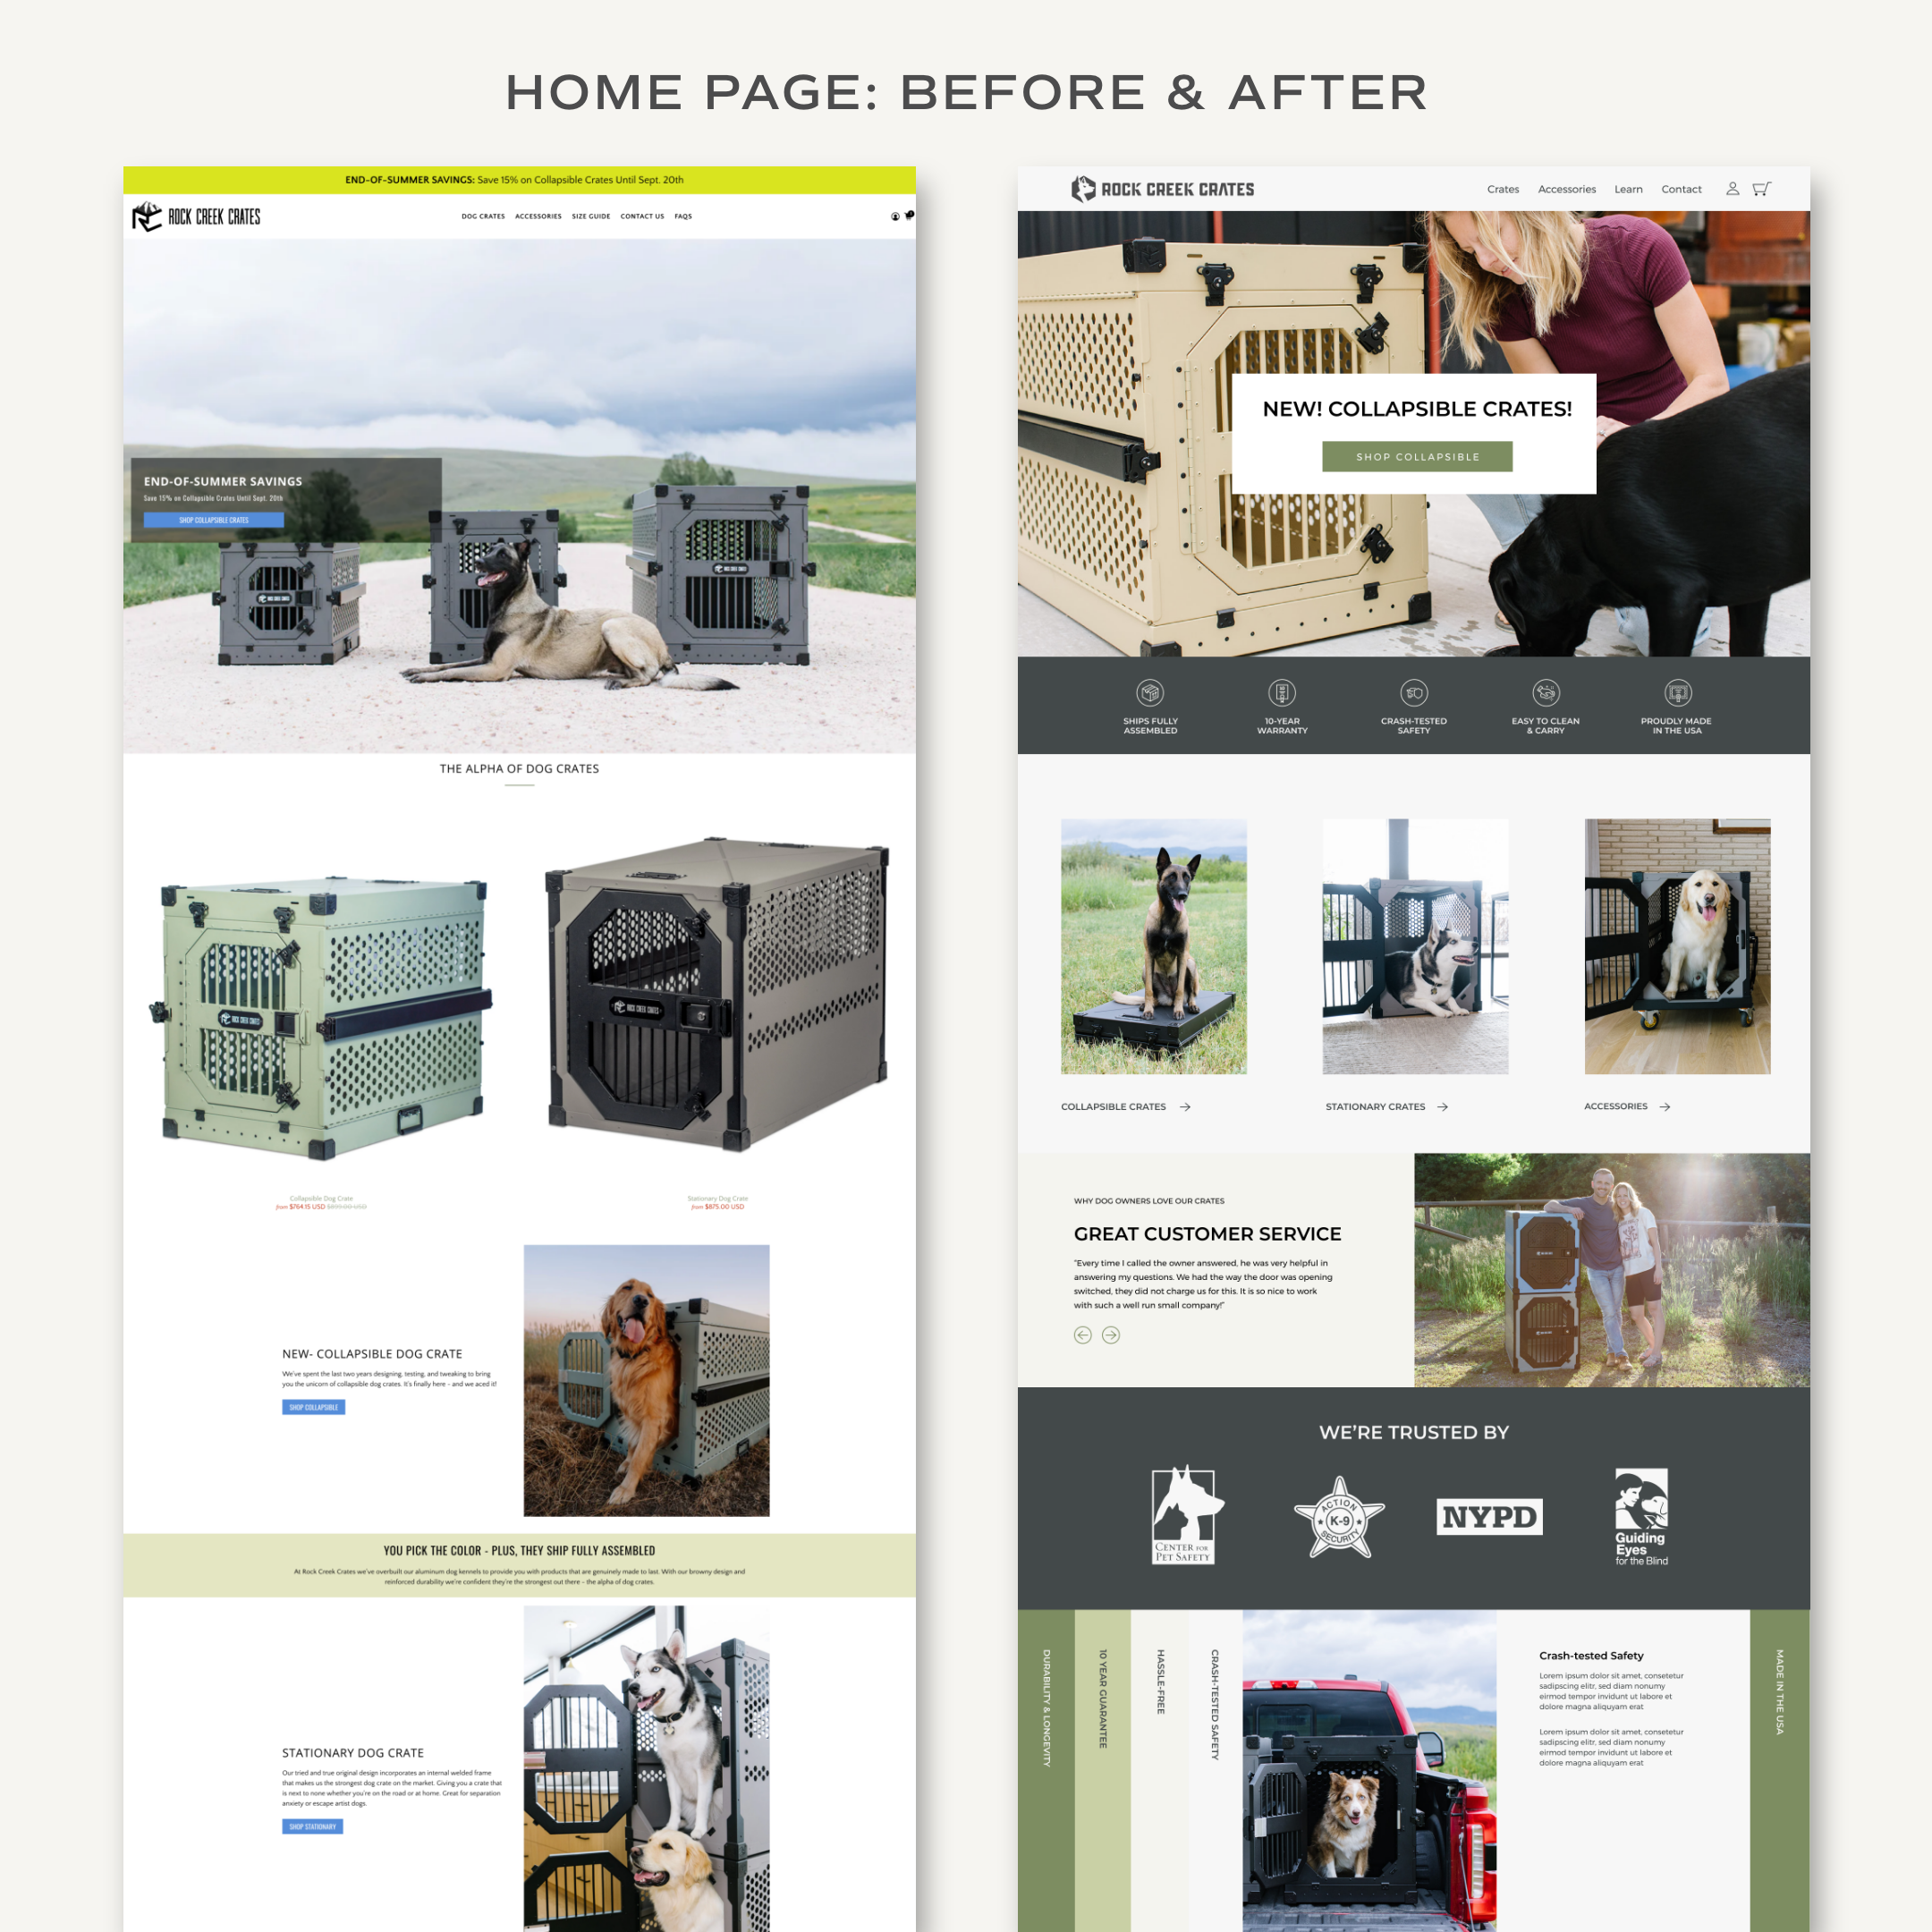 WildHIve-Studio_Rock-Creek-Crates_branding-and-Shopify-website-design-and-development_before-and-after_2.png